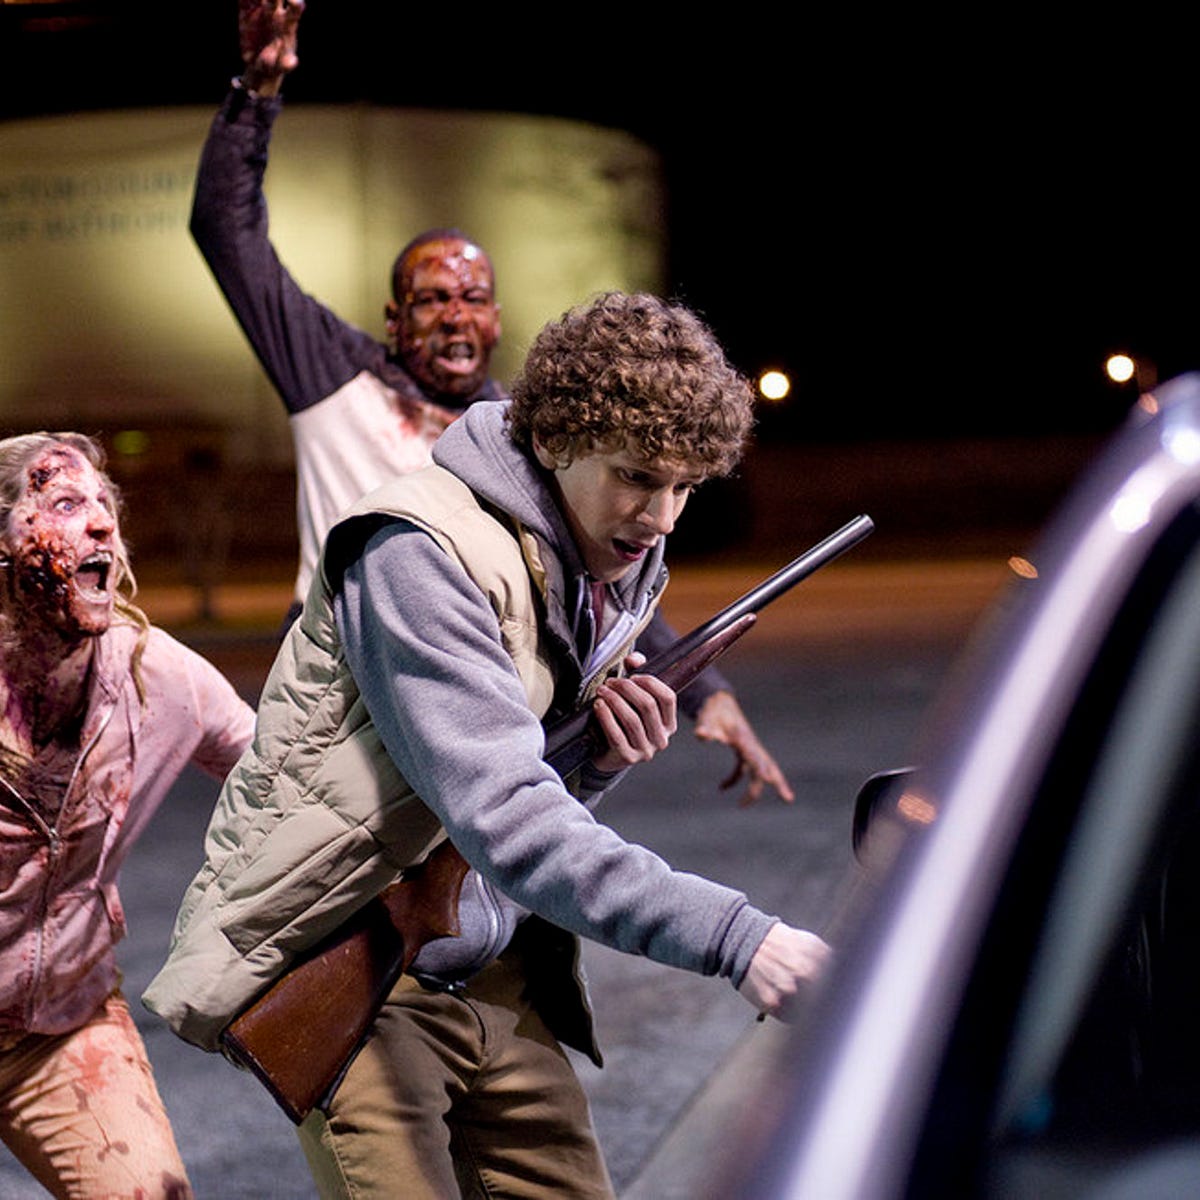 Zombieland: Double Tap' Premiere: Writers Say Zombie Fare Is